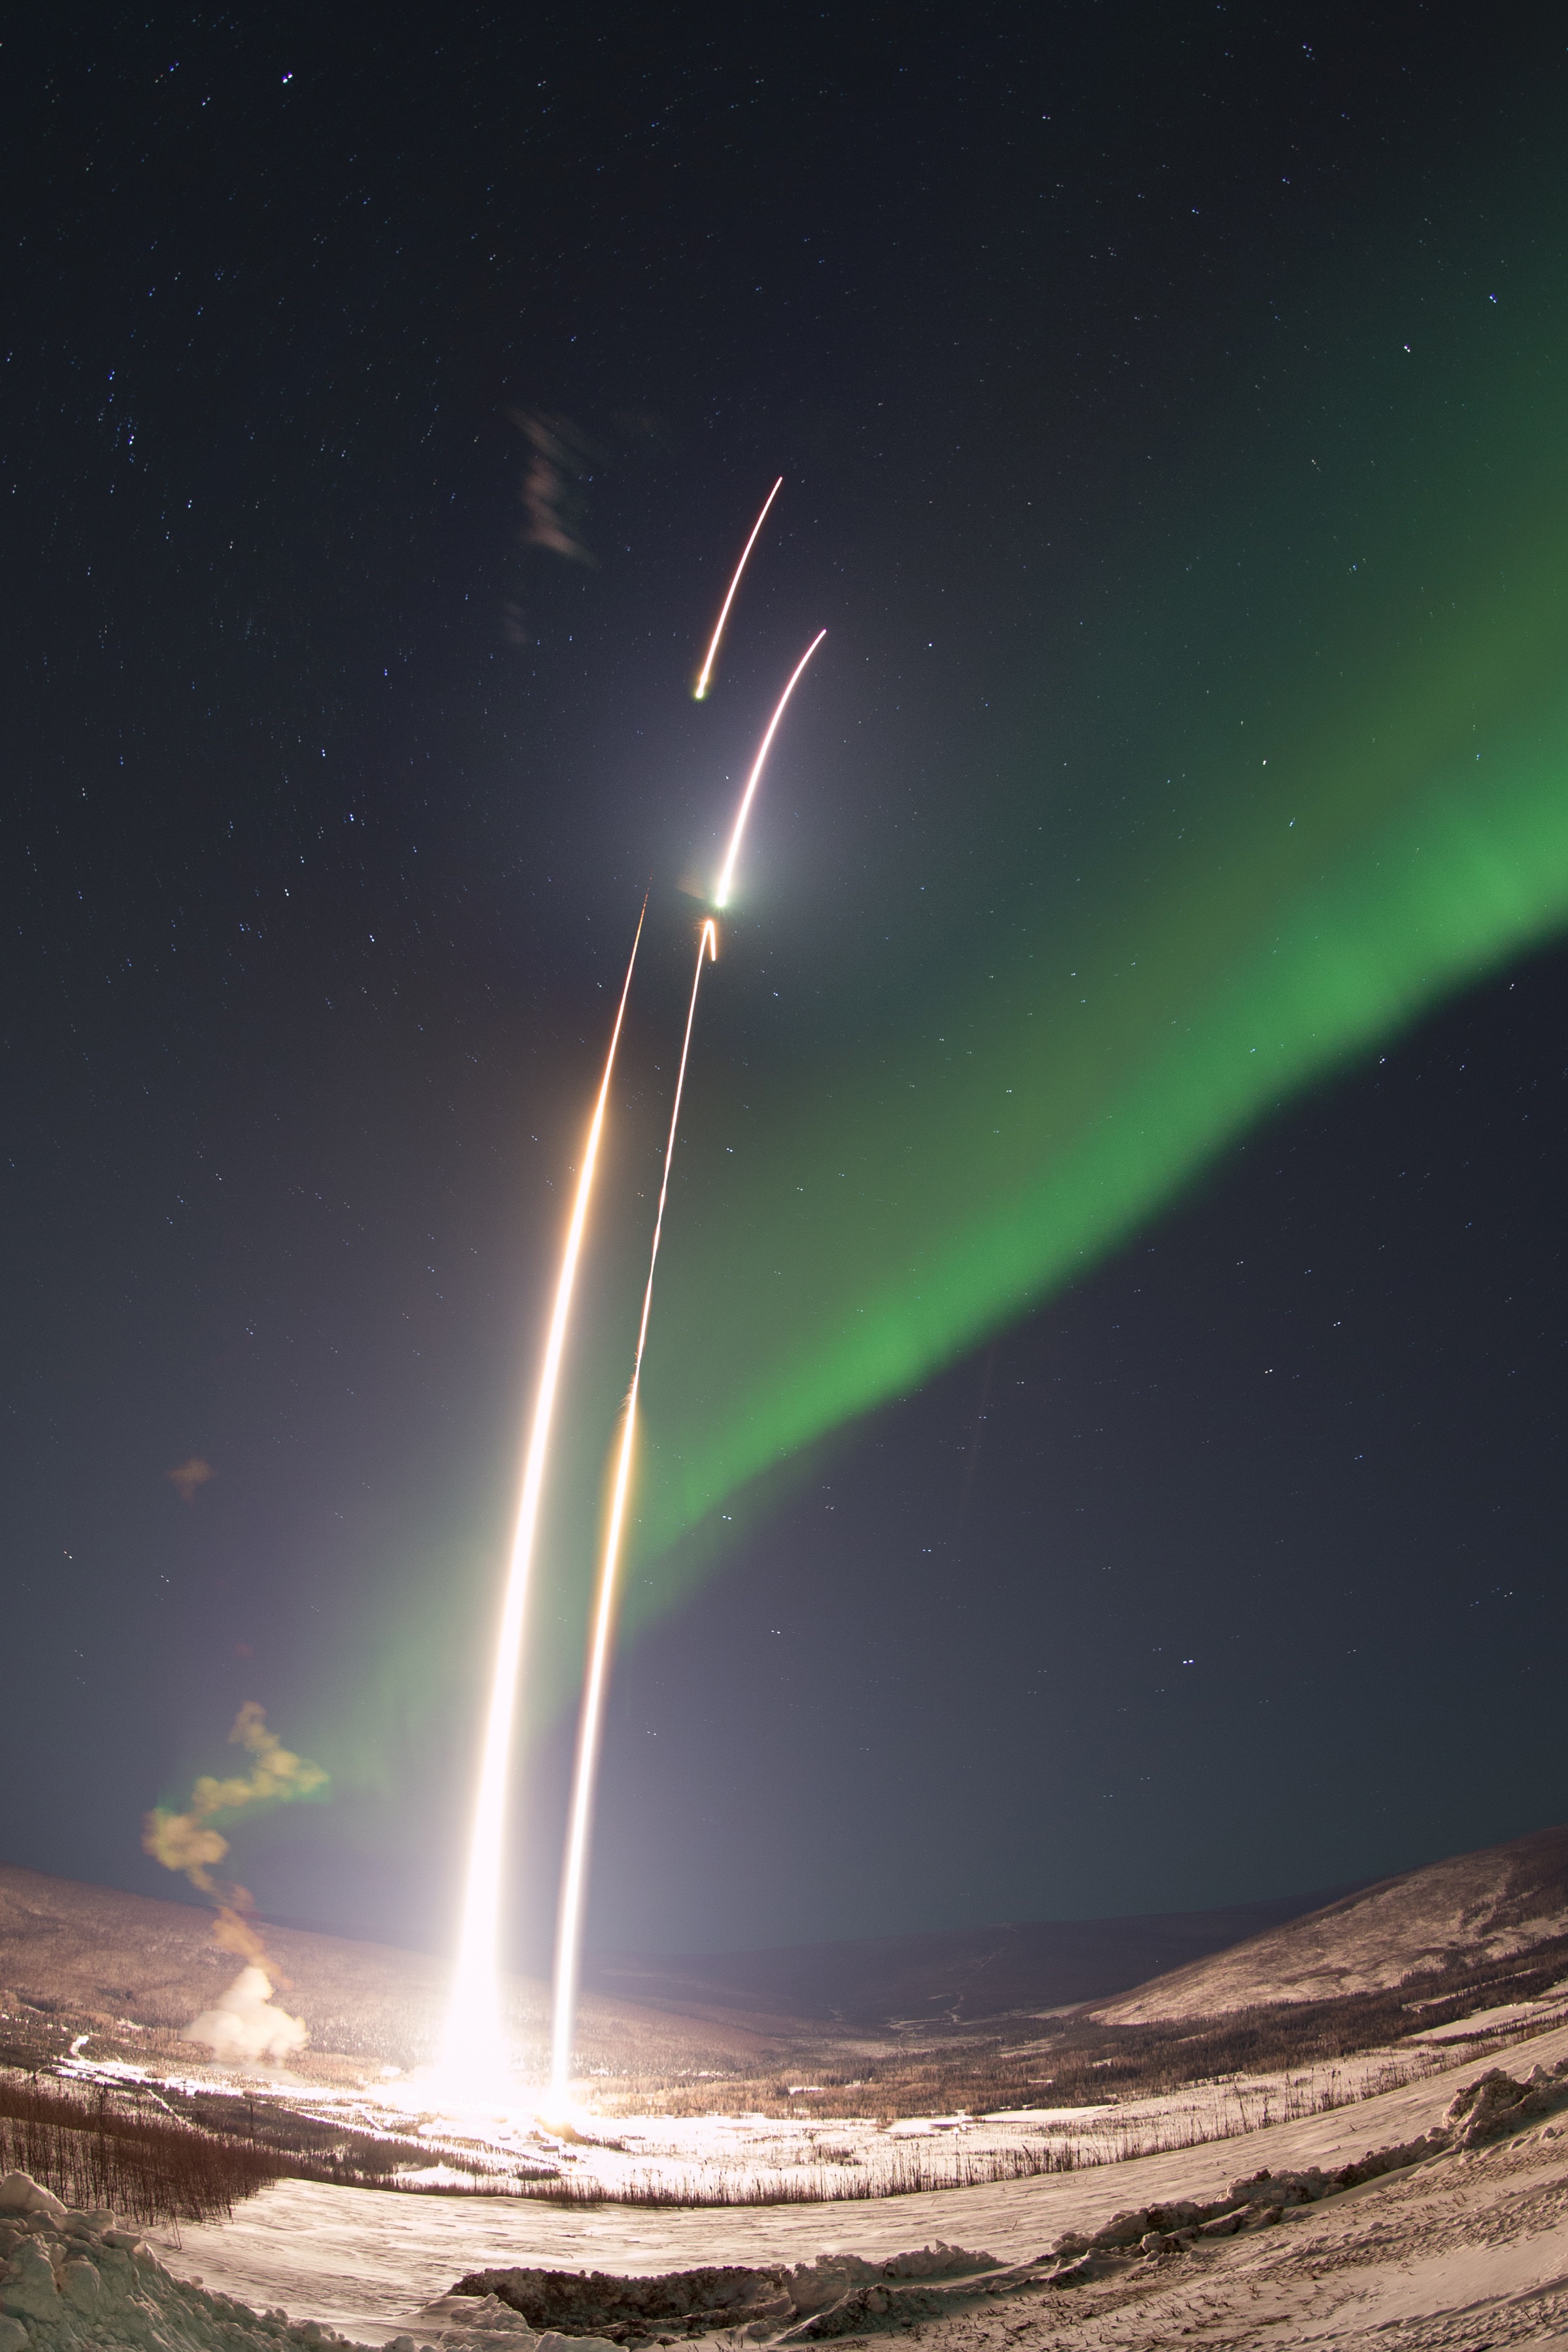 Studying the Northern Lights by Rocket